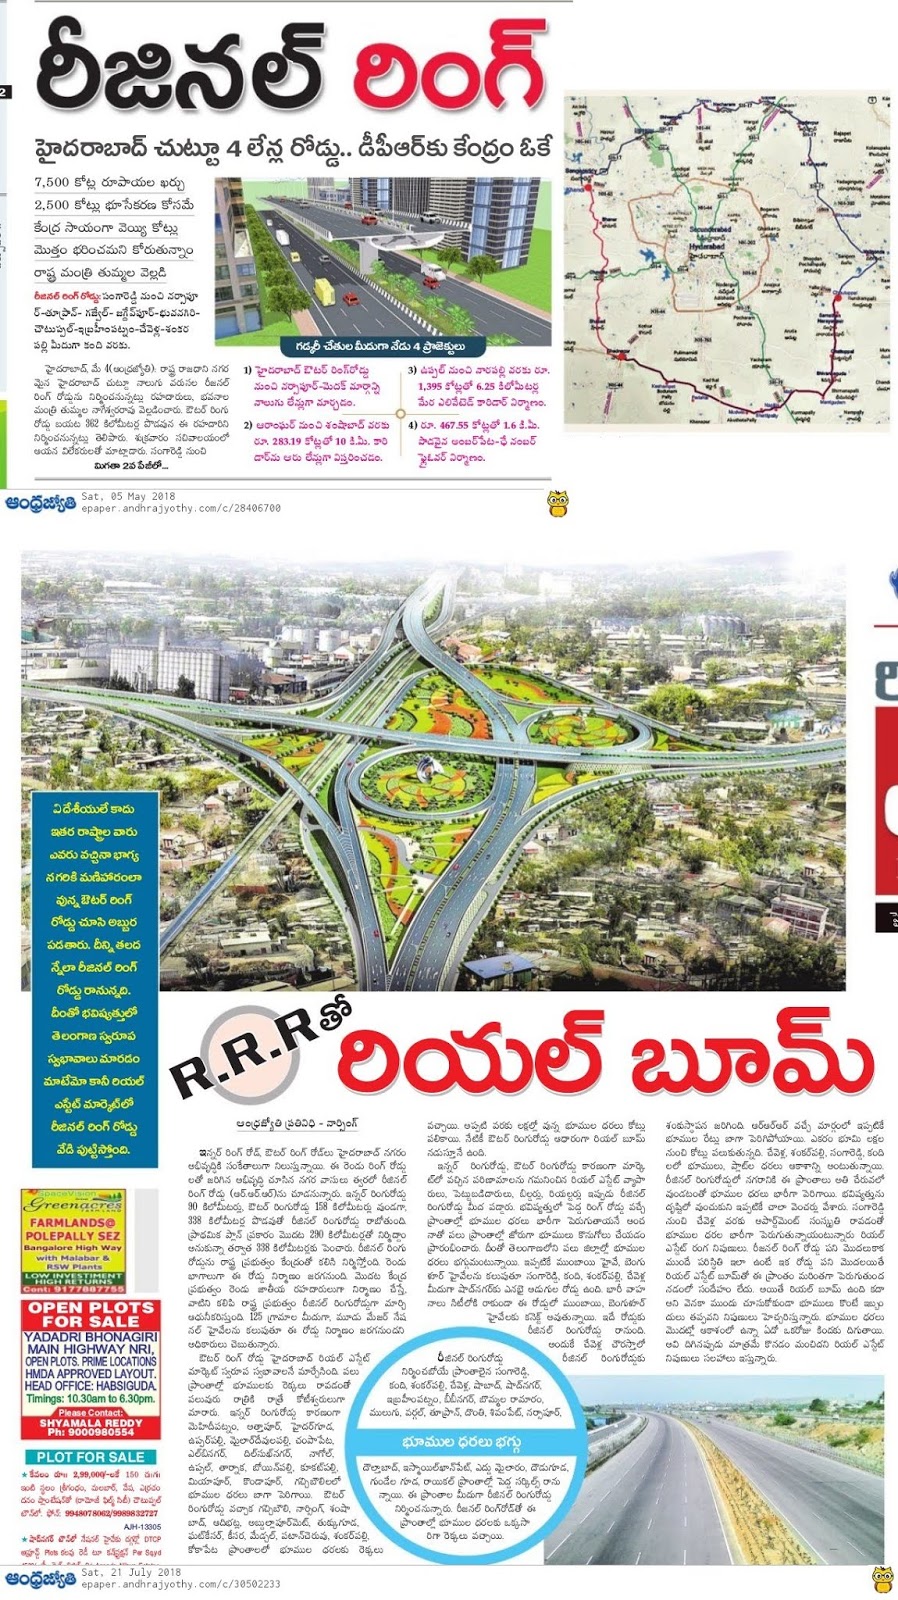 Hyderabad Regional Ring Road Project Details including Route Alignment,  Land Acquisition Details etc